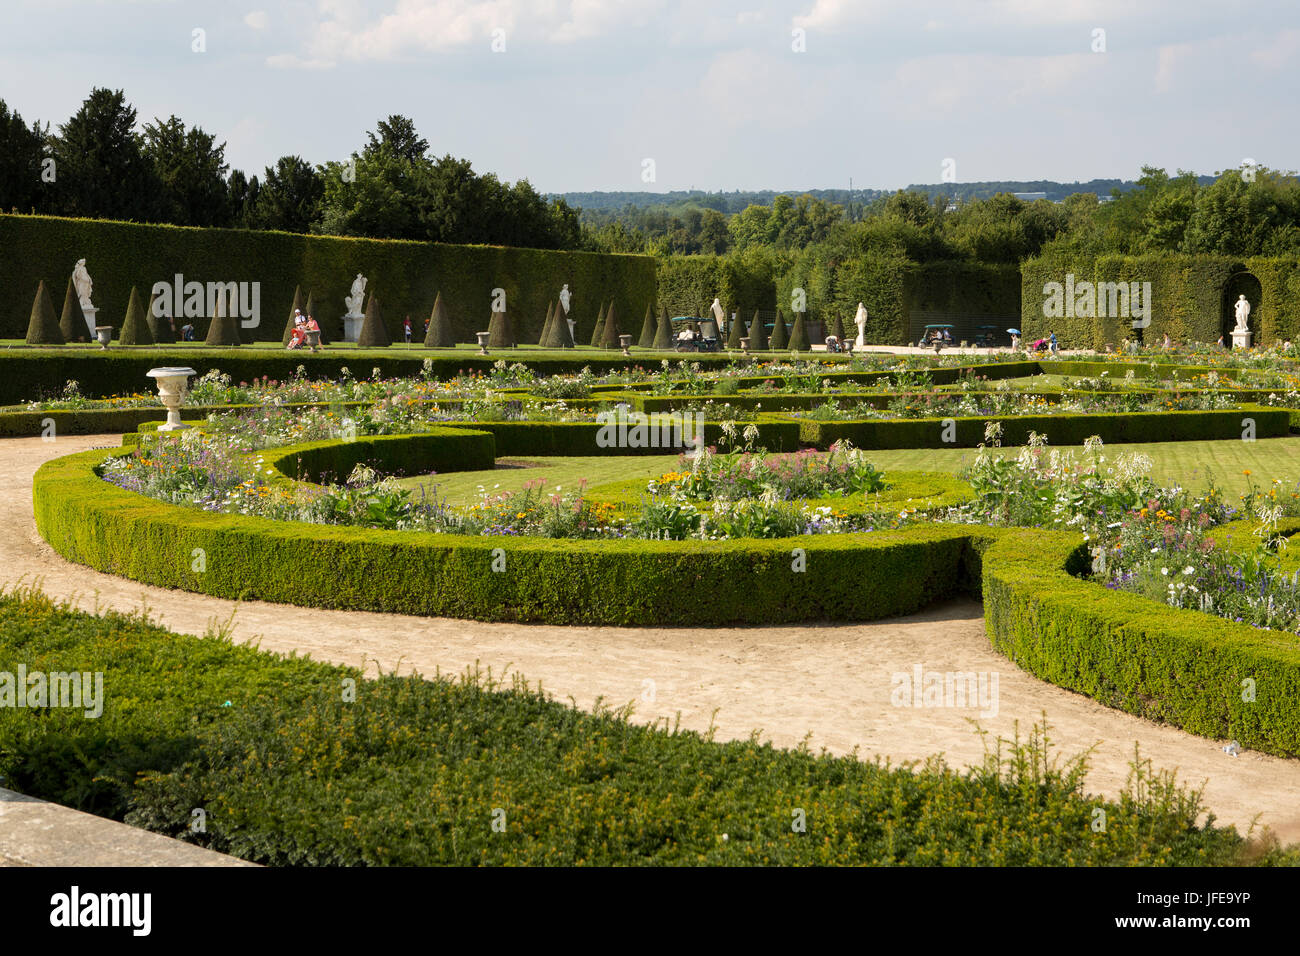 A view of the gardens at the Palace of Versailles. Stock Photo